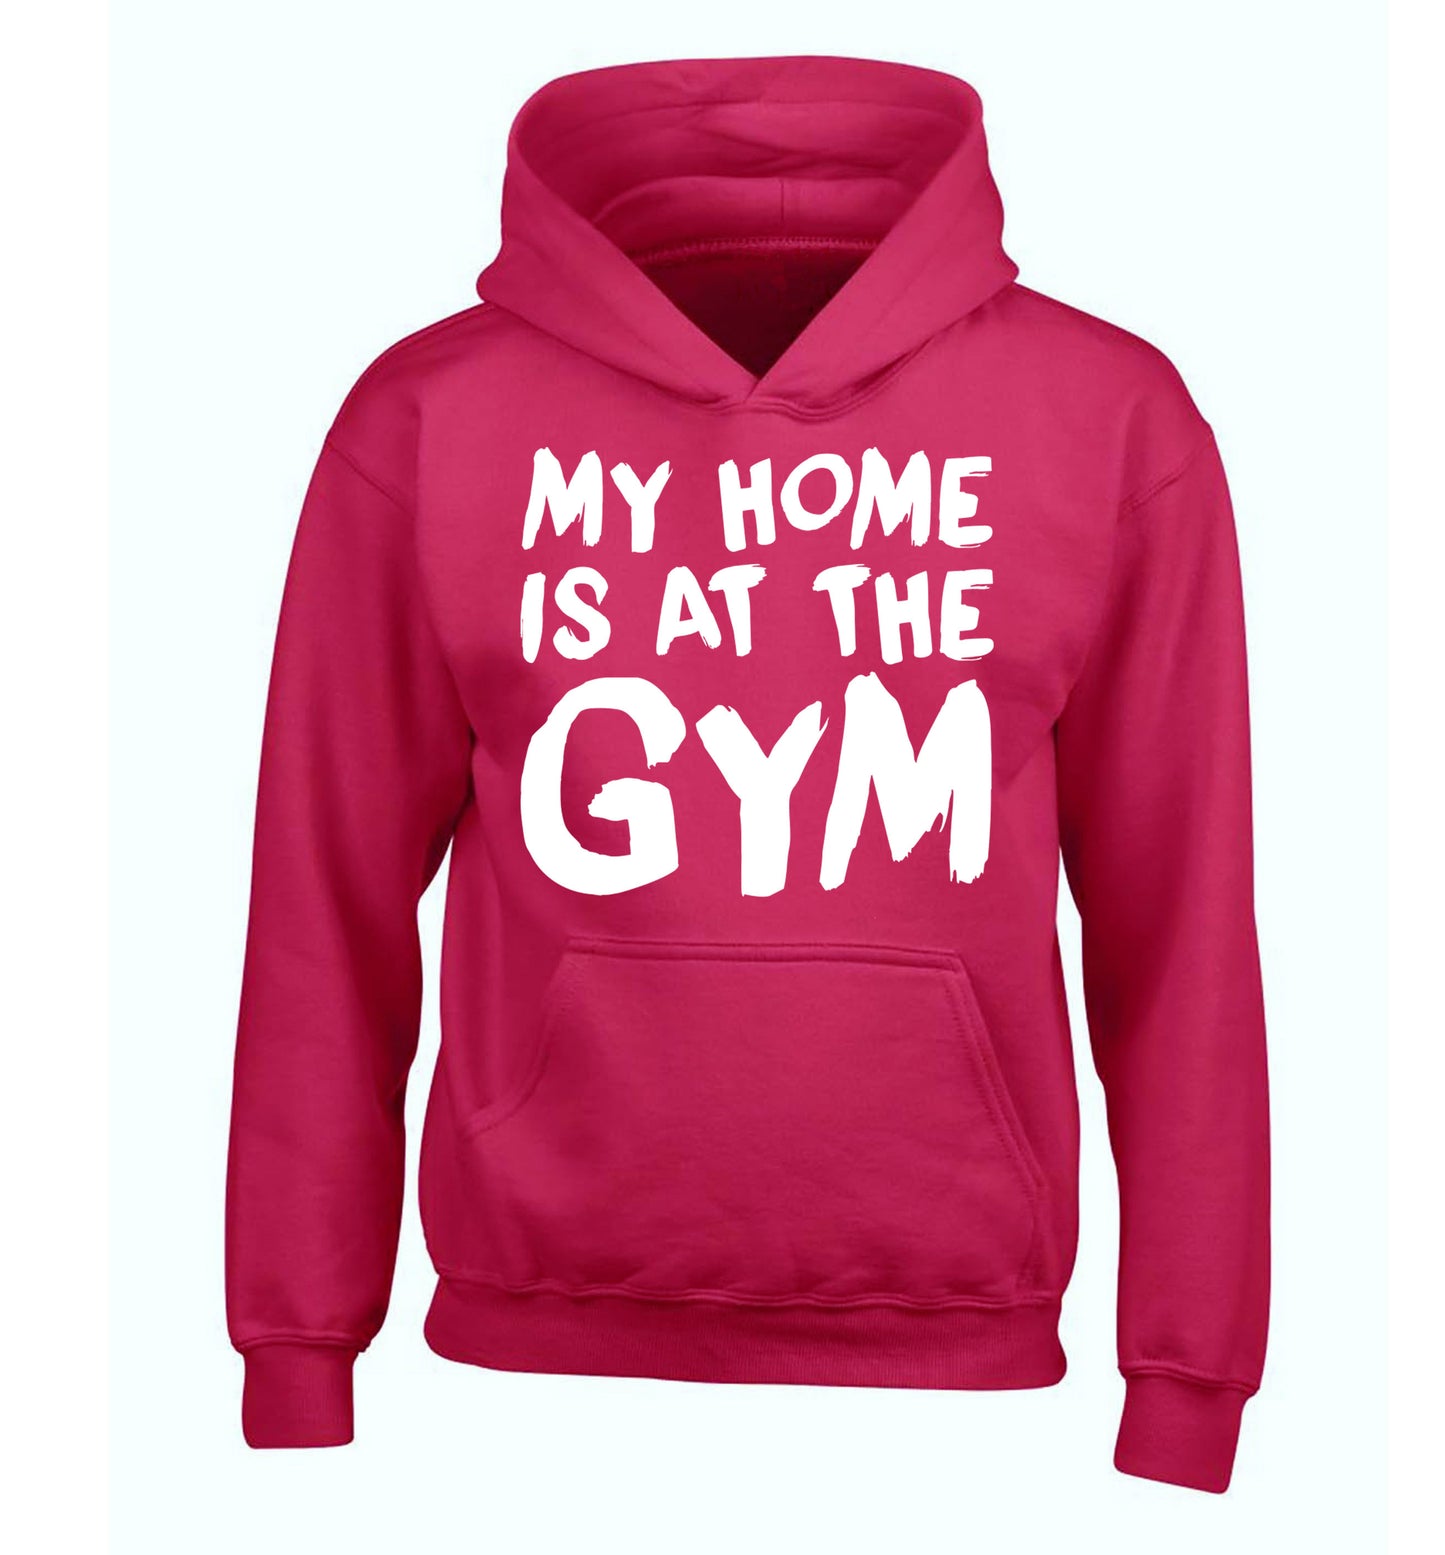 My home is at the gym children's pink hoodie 12-14 Years